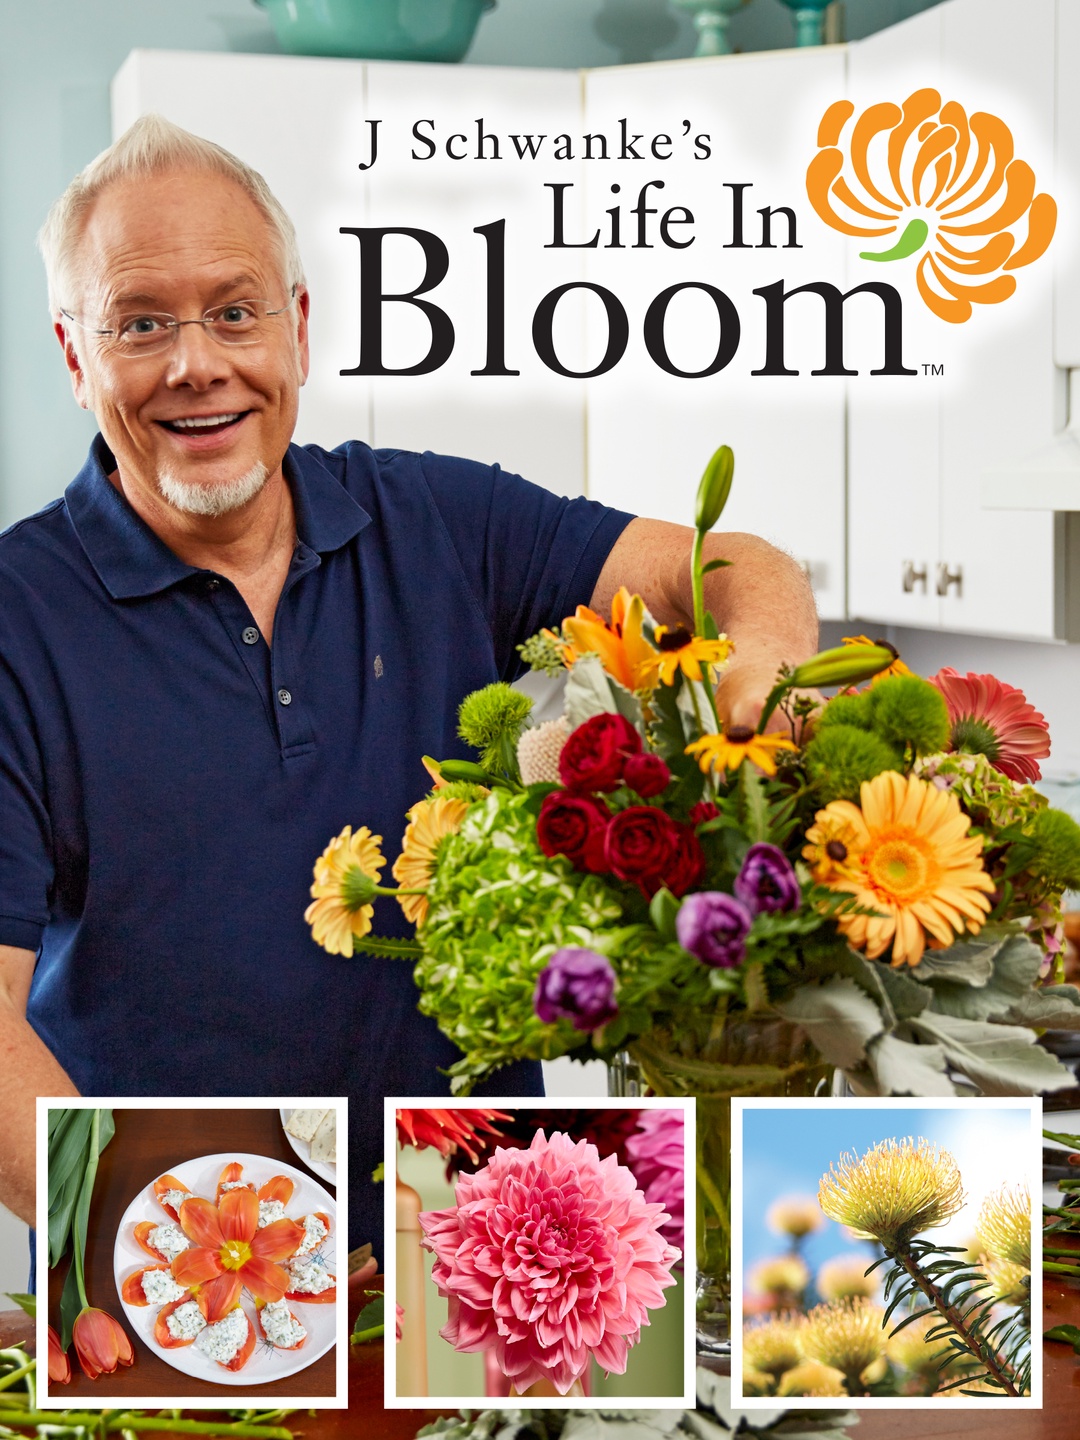 Life in Bloom